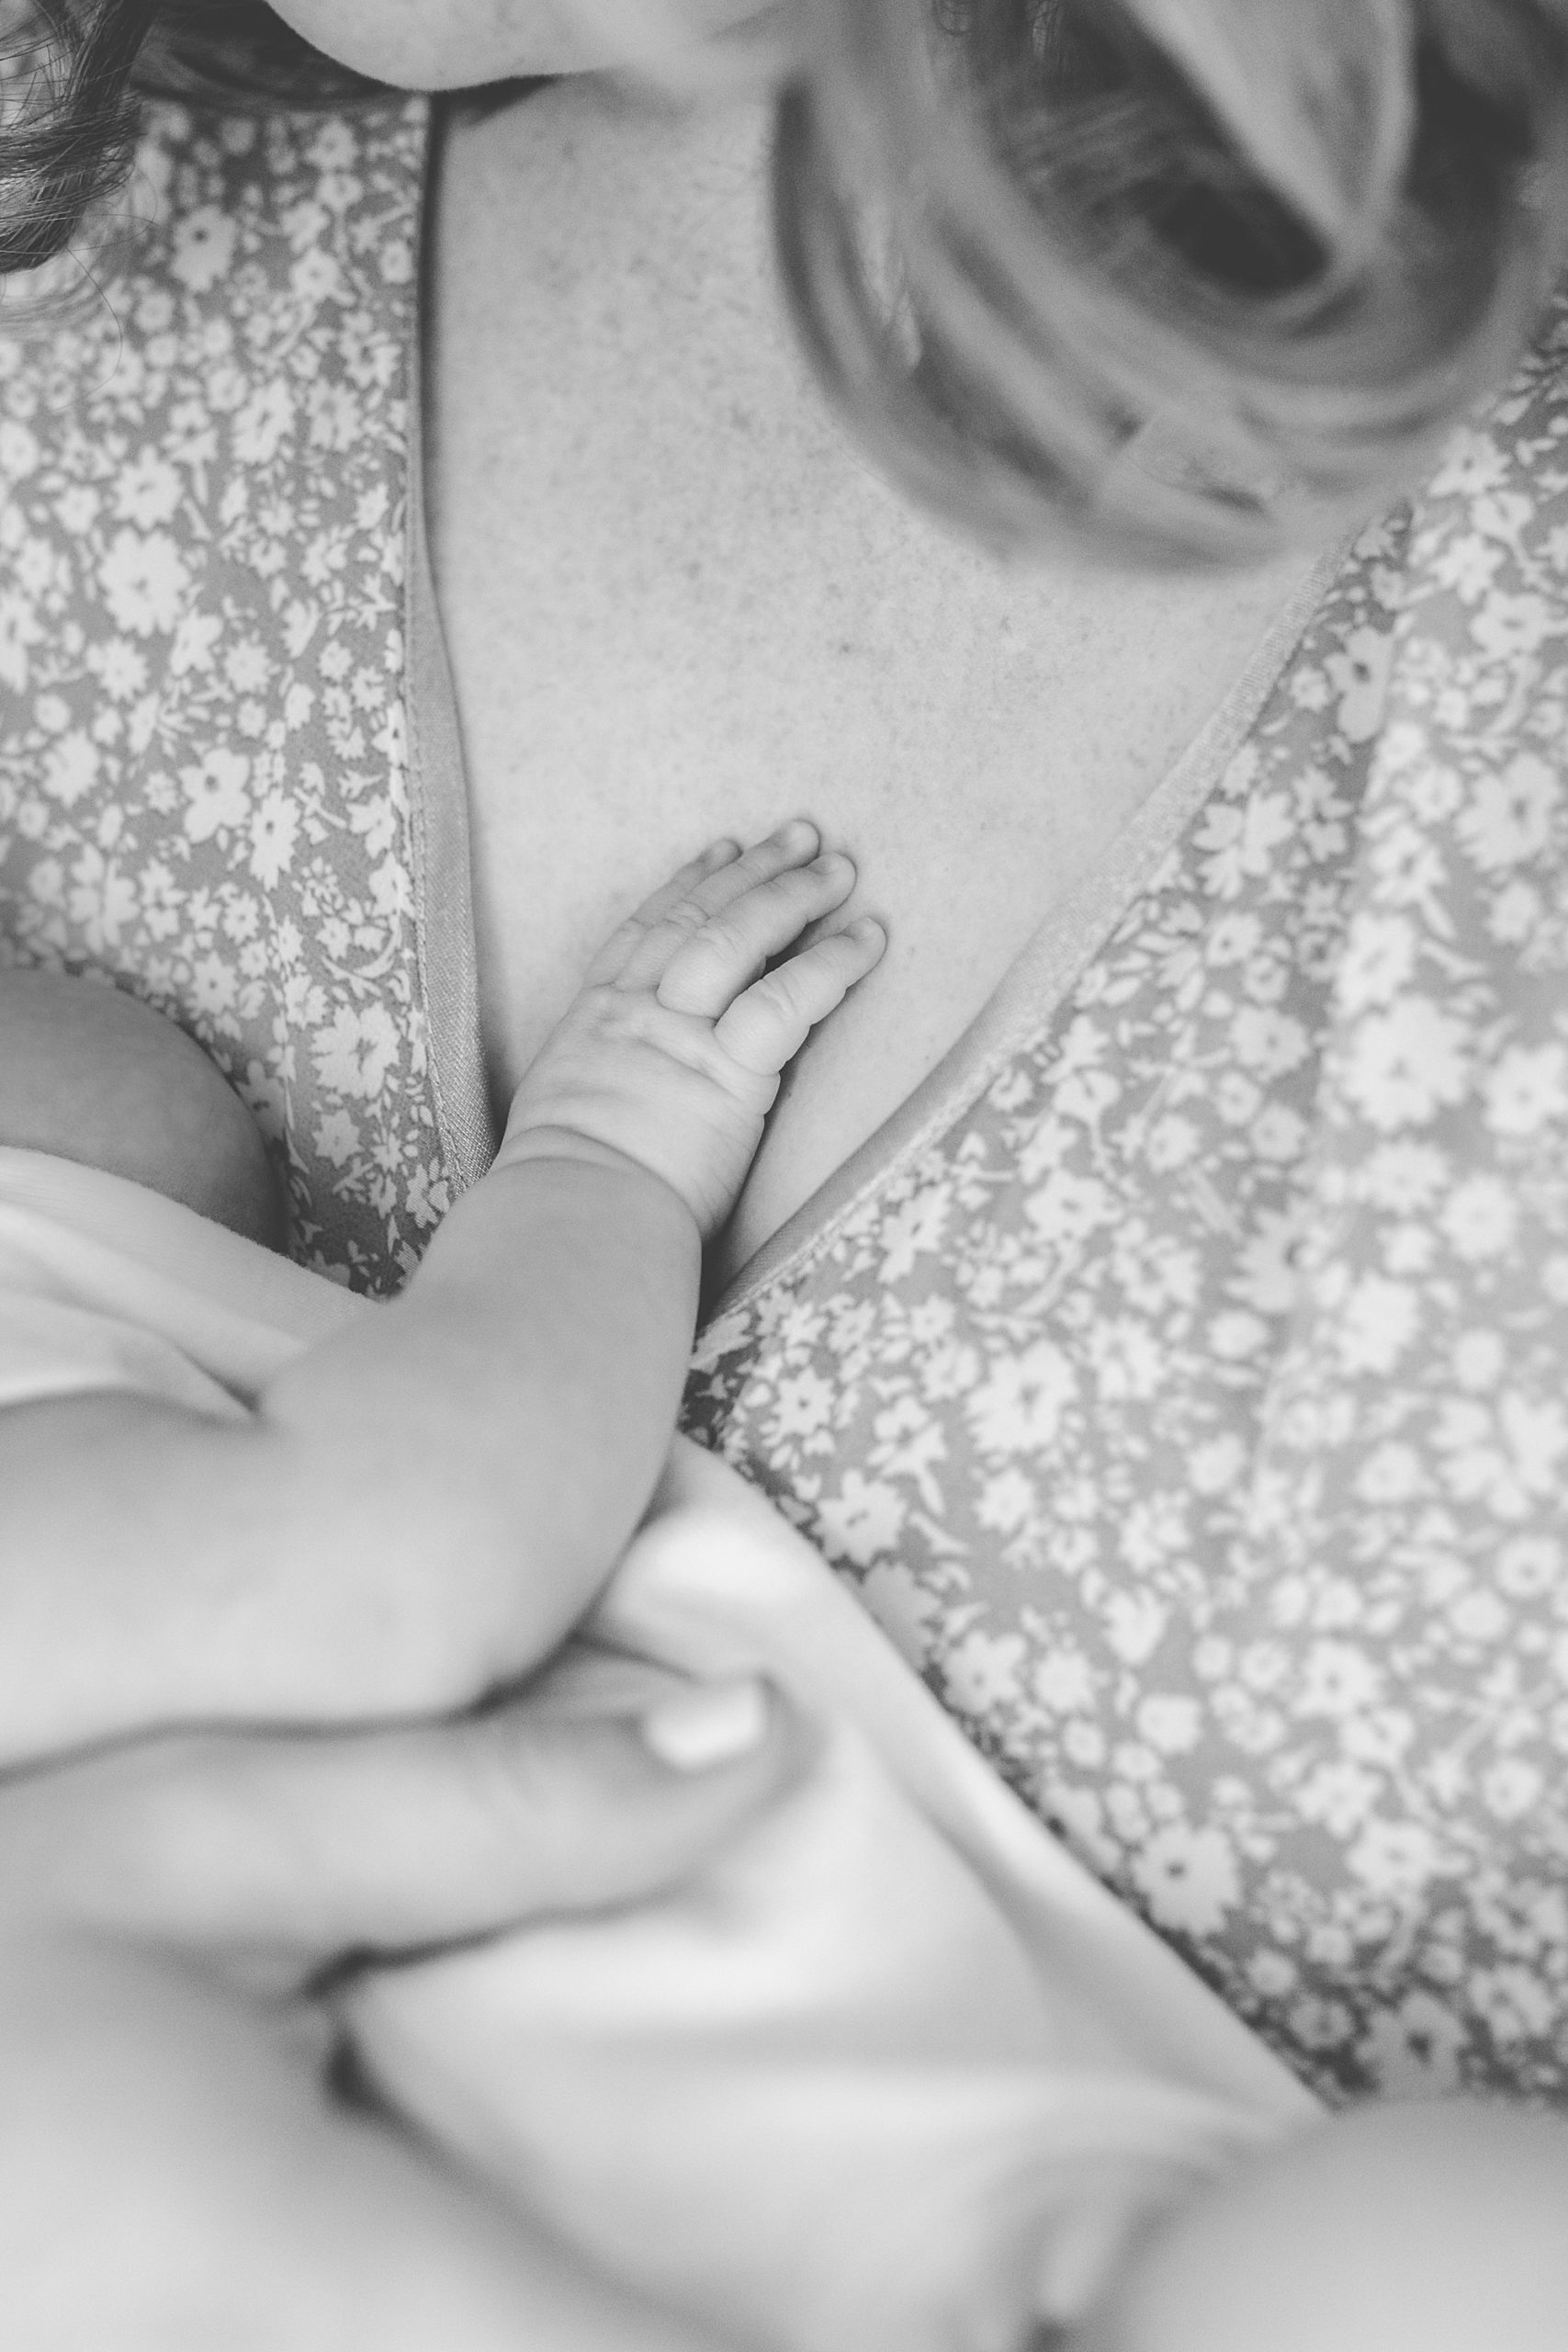 baby lays hand on mom's chest during lifestyle newborn session